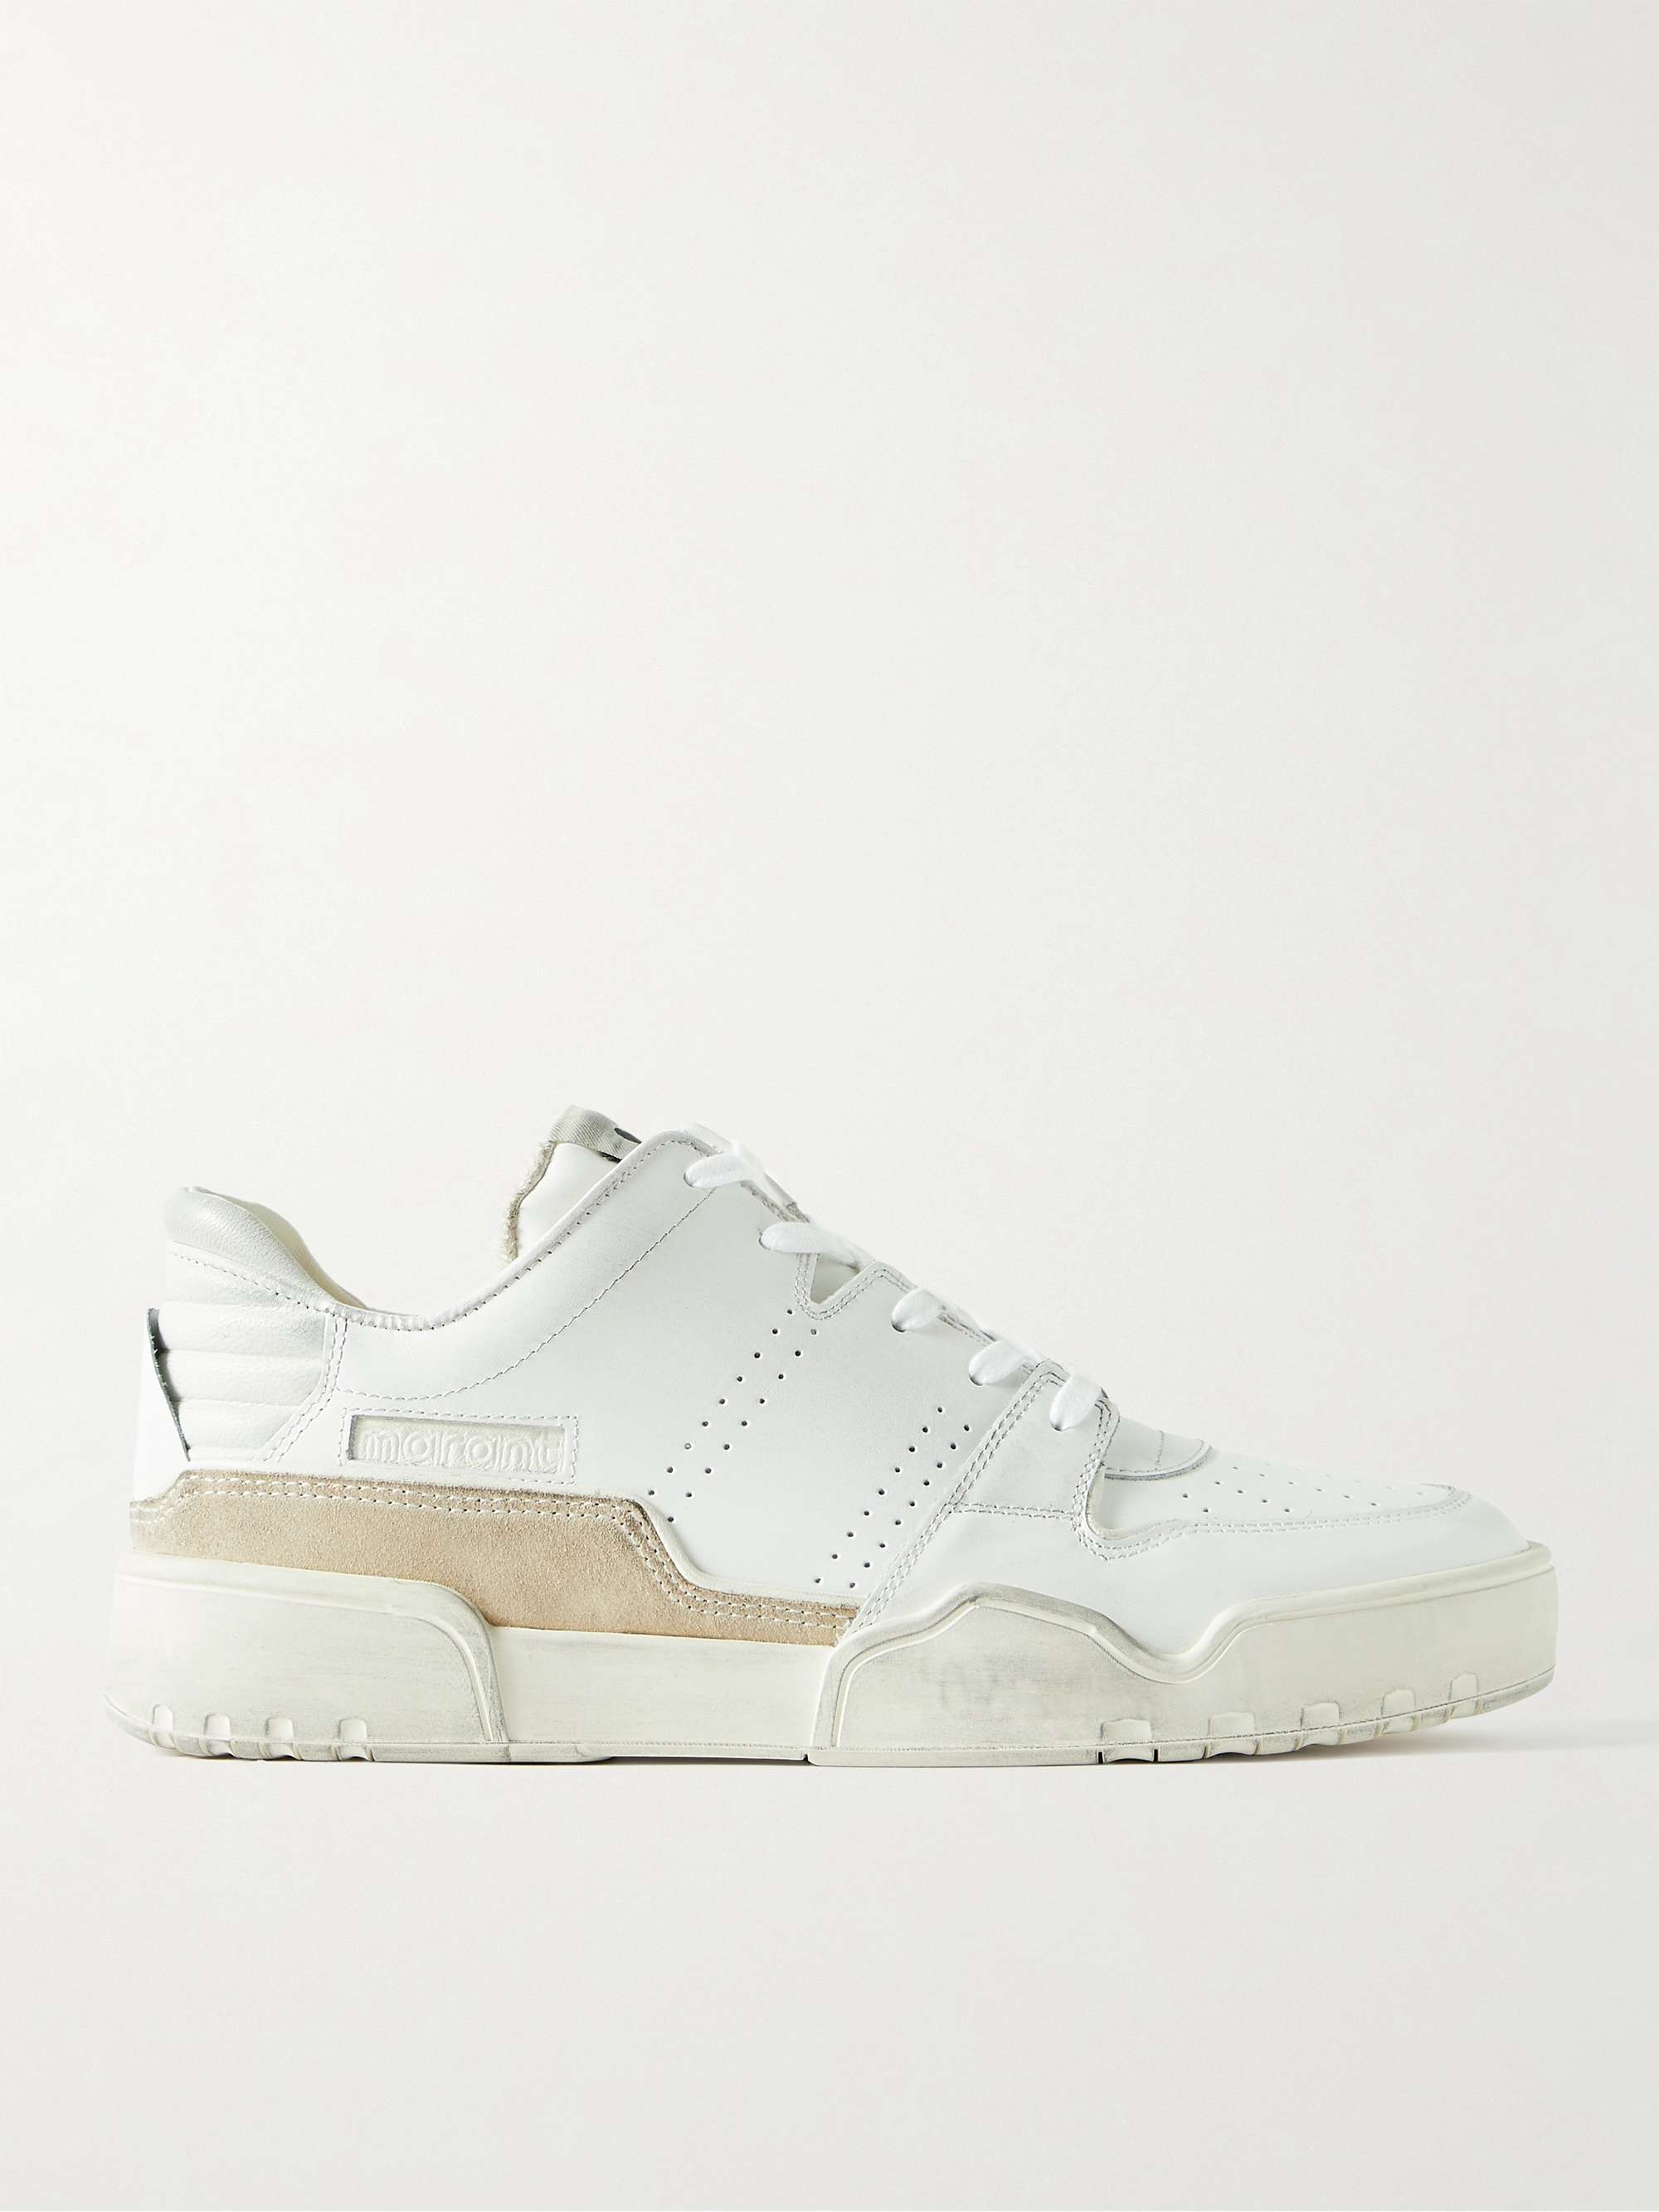 ISABEL MARANT Stadium Suede-Trimmed Leather Sneakers